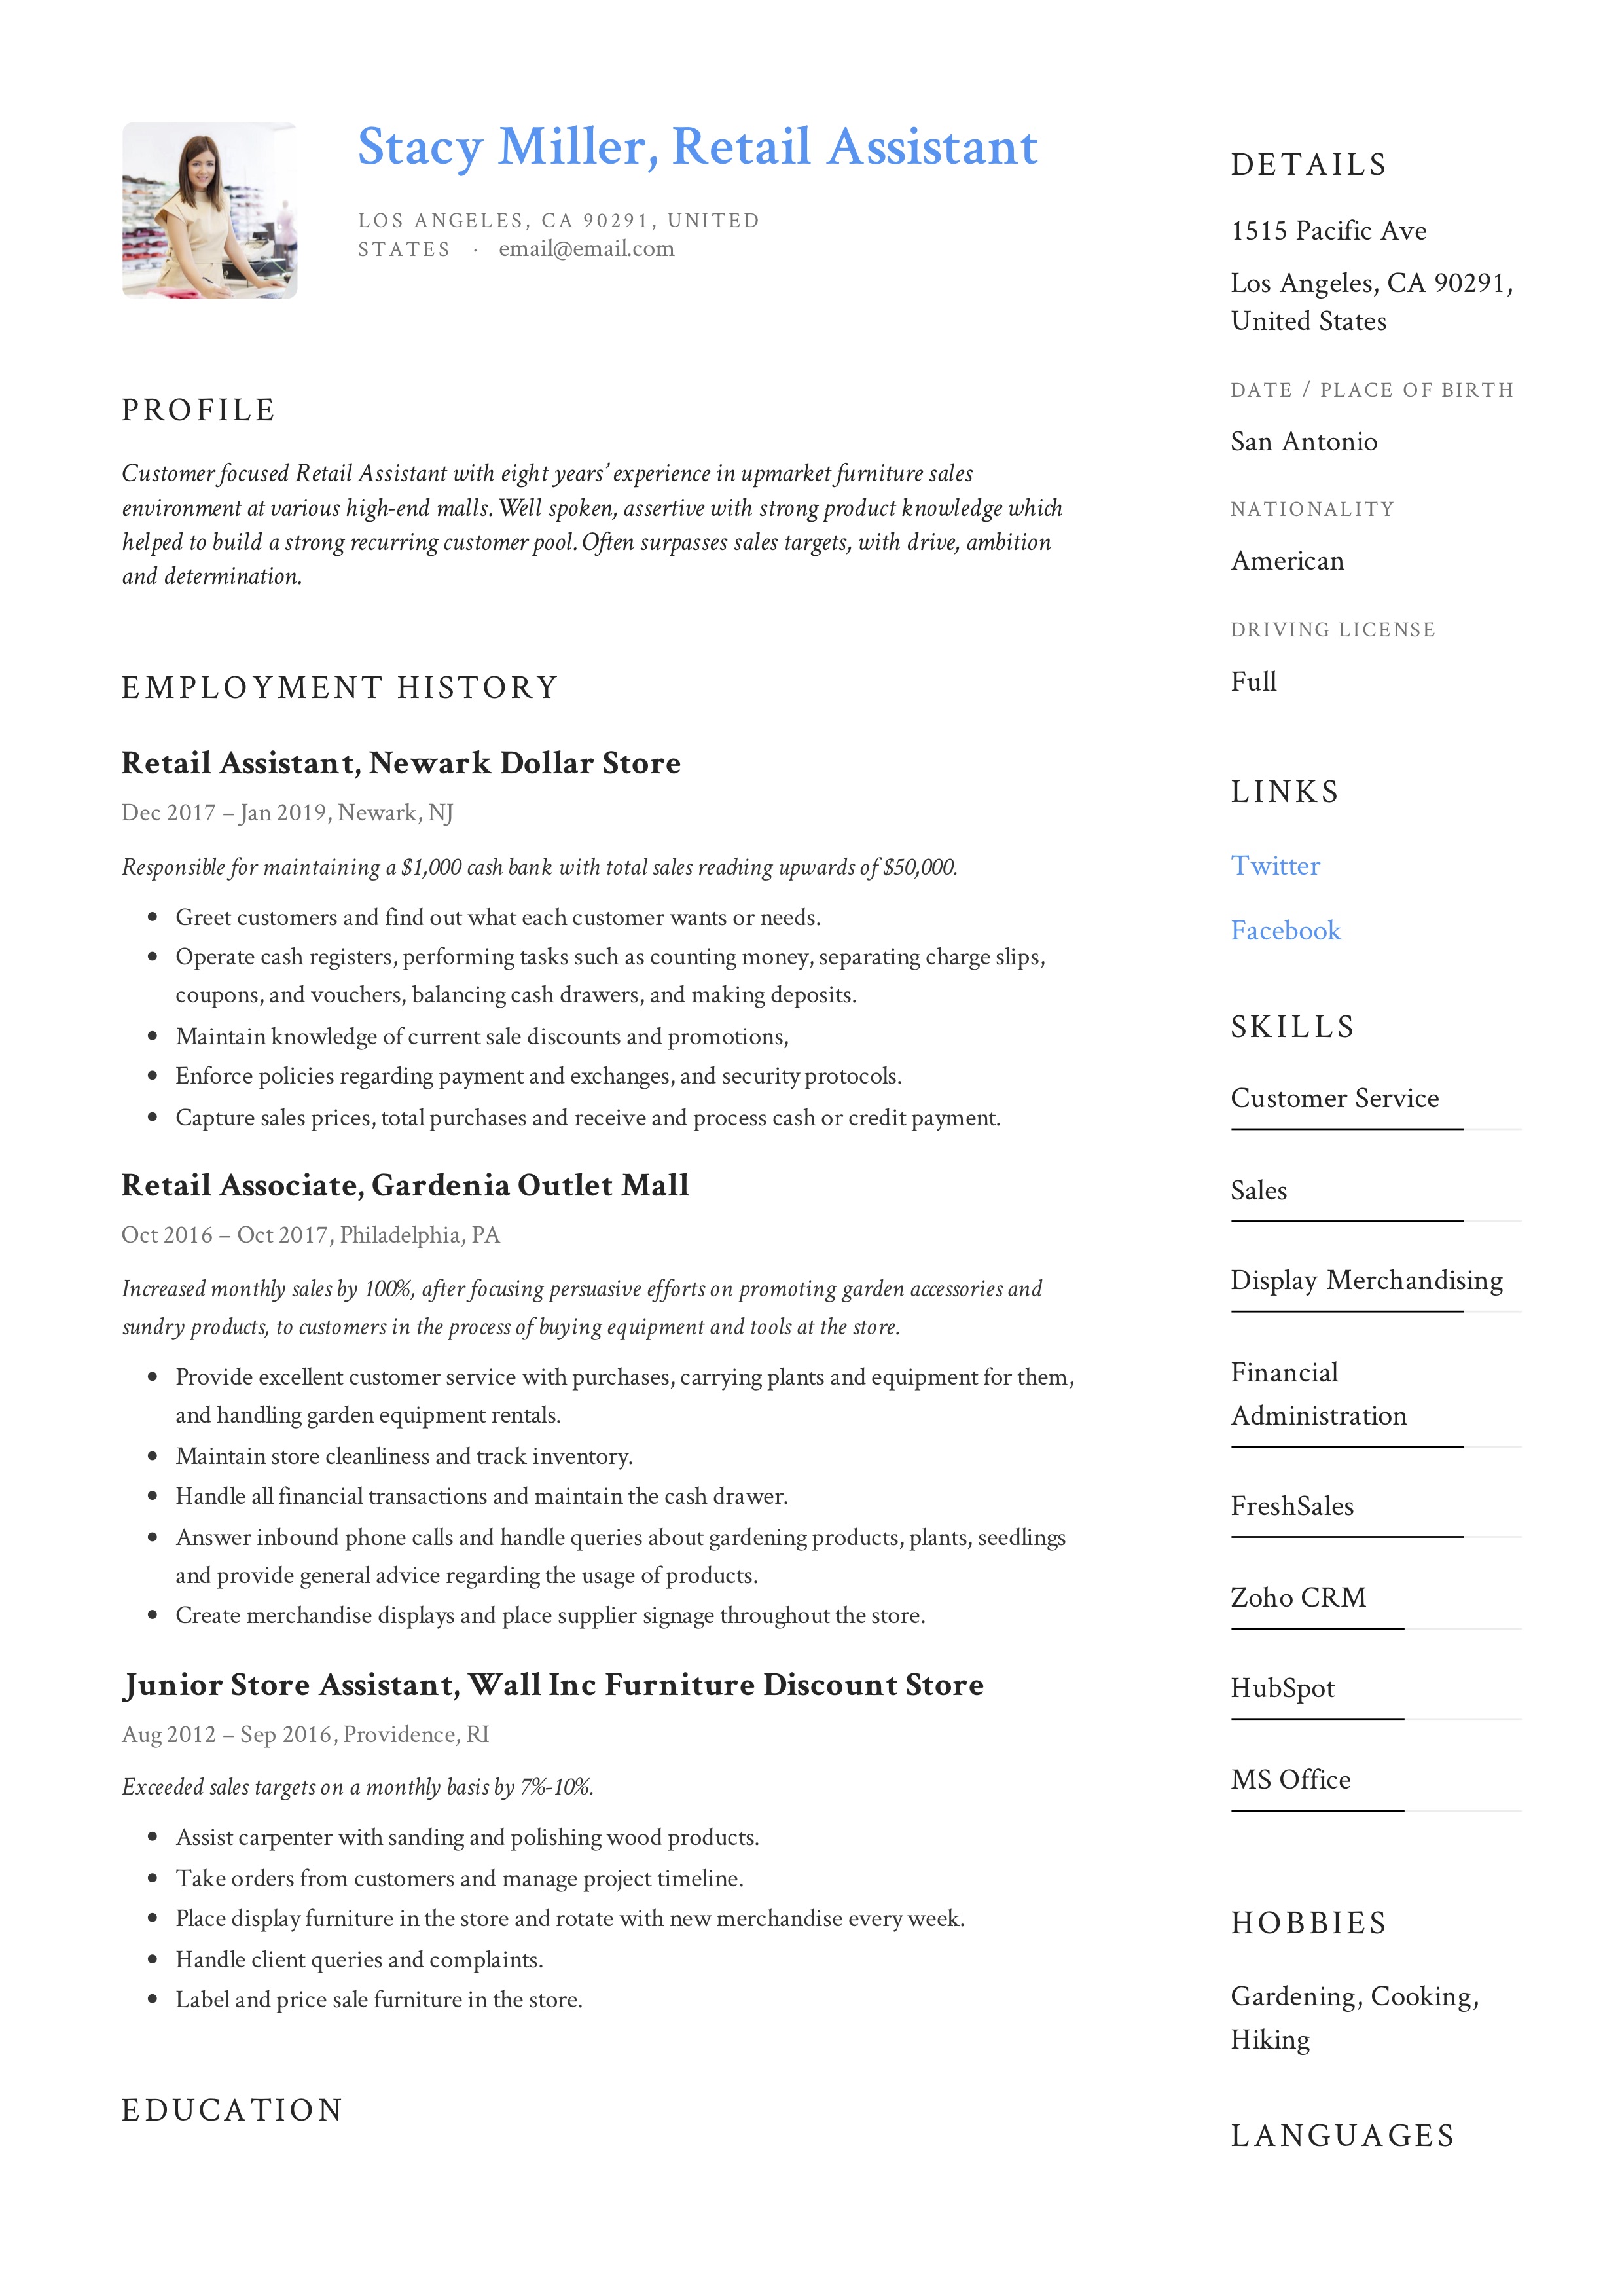 Sample Resume Retail Assistant